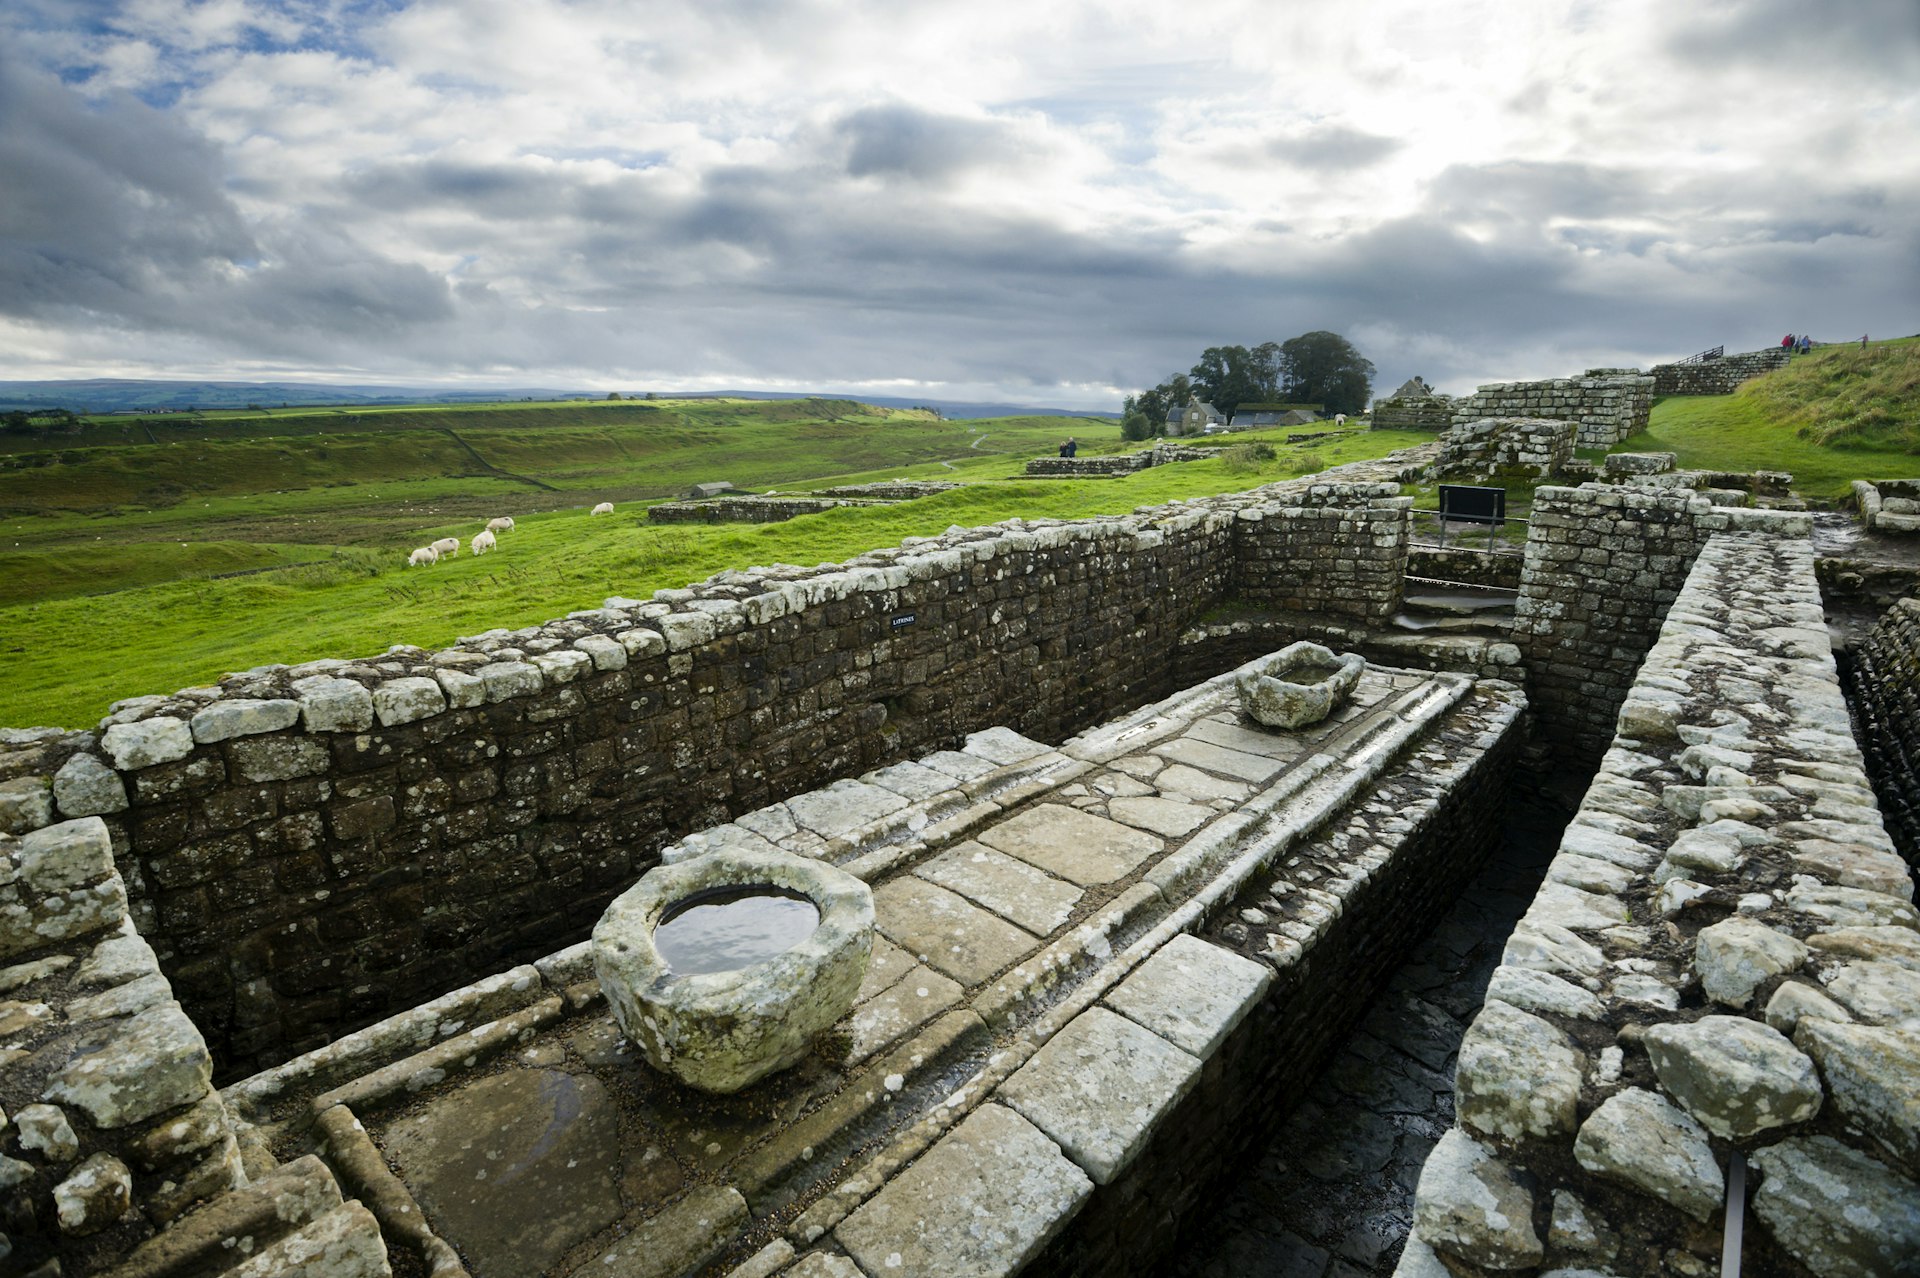 Latrines at Housesteads Fort Roman ruins